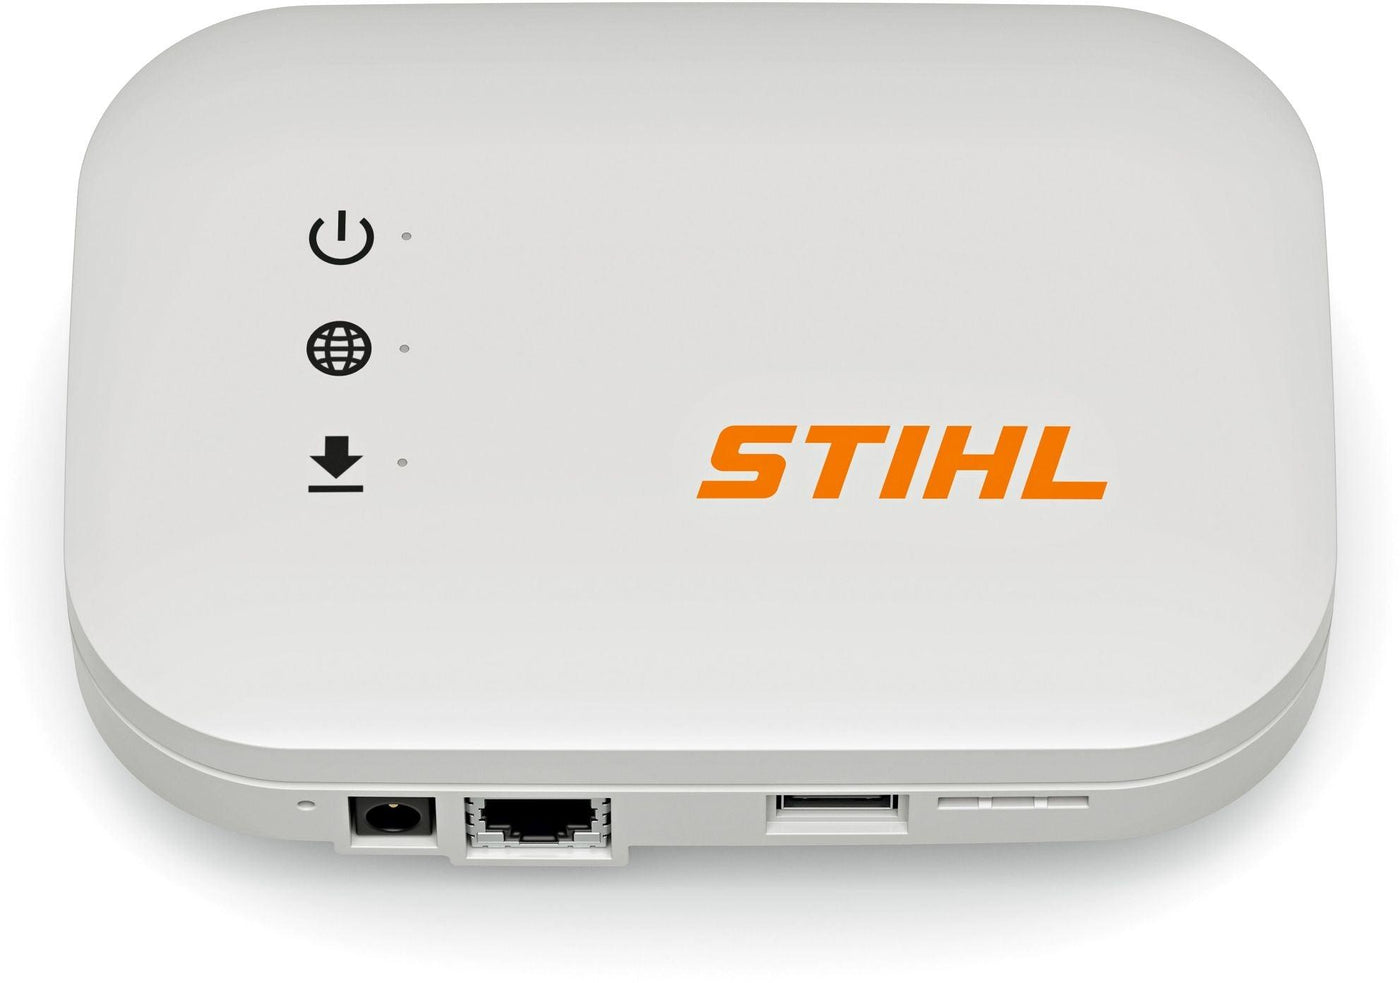 STIHL Systembaustein connected Box stationäre Version - MotorLand.at